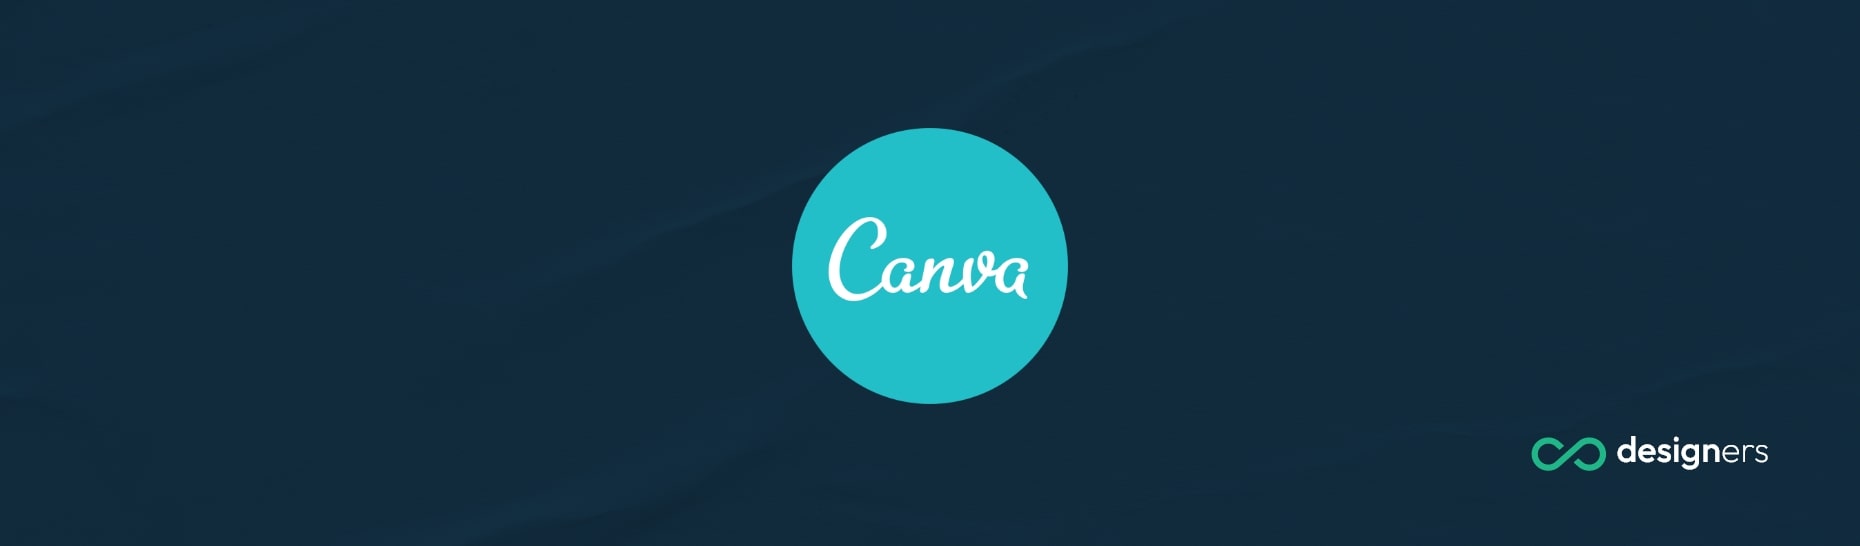 Is There a Limit to Free Canva?